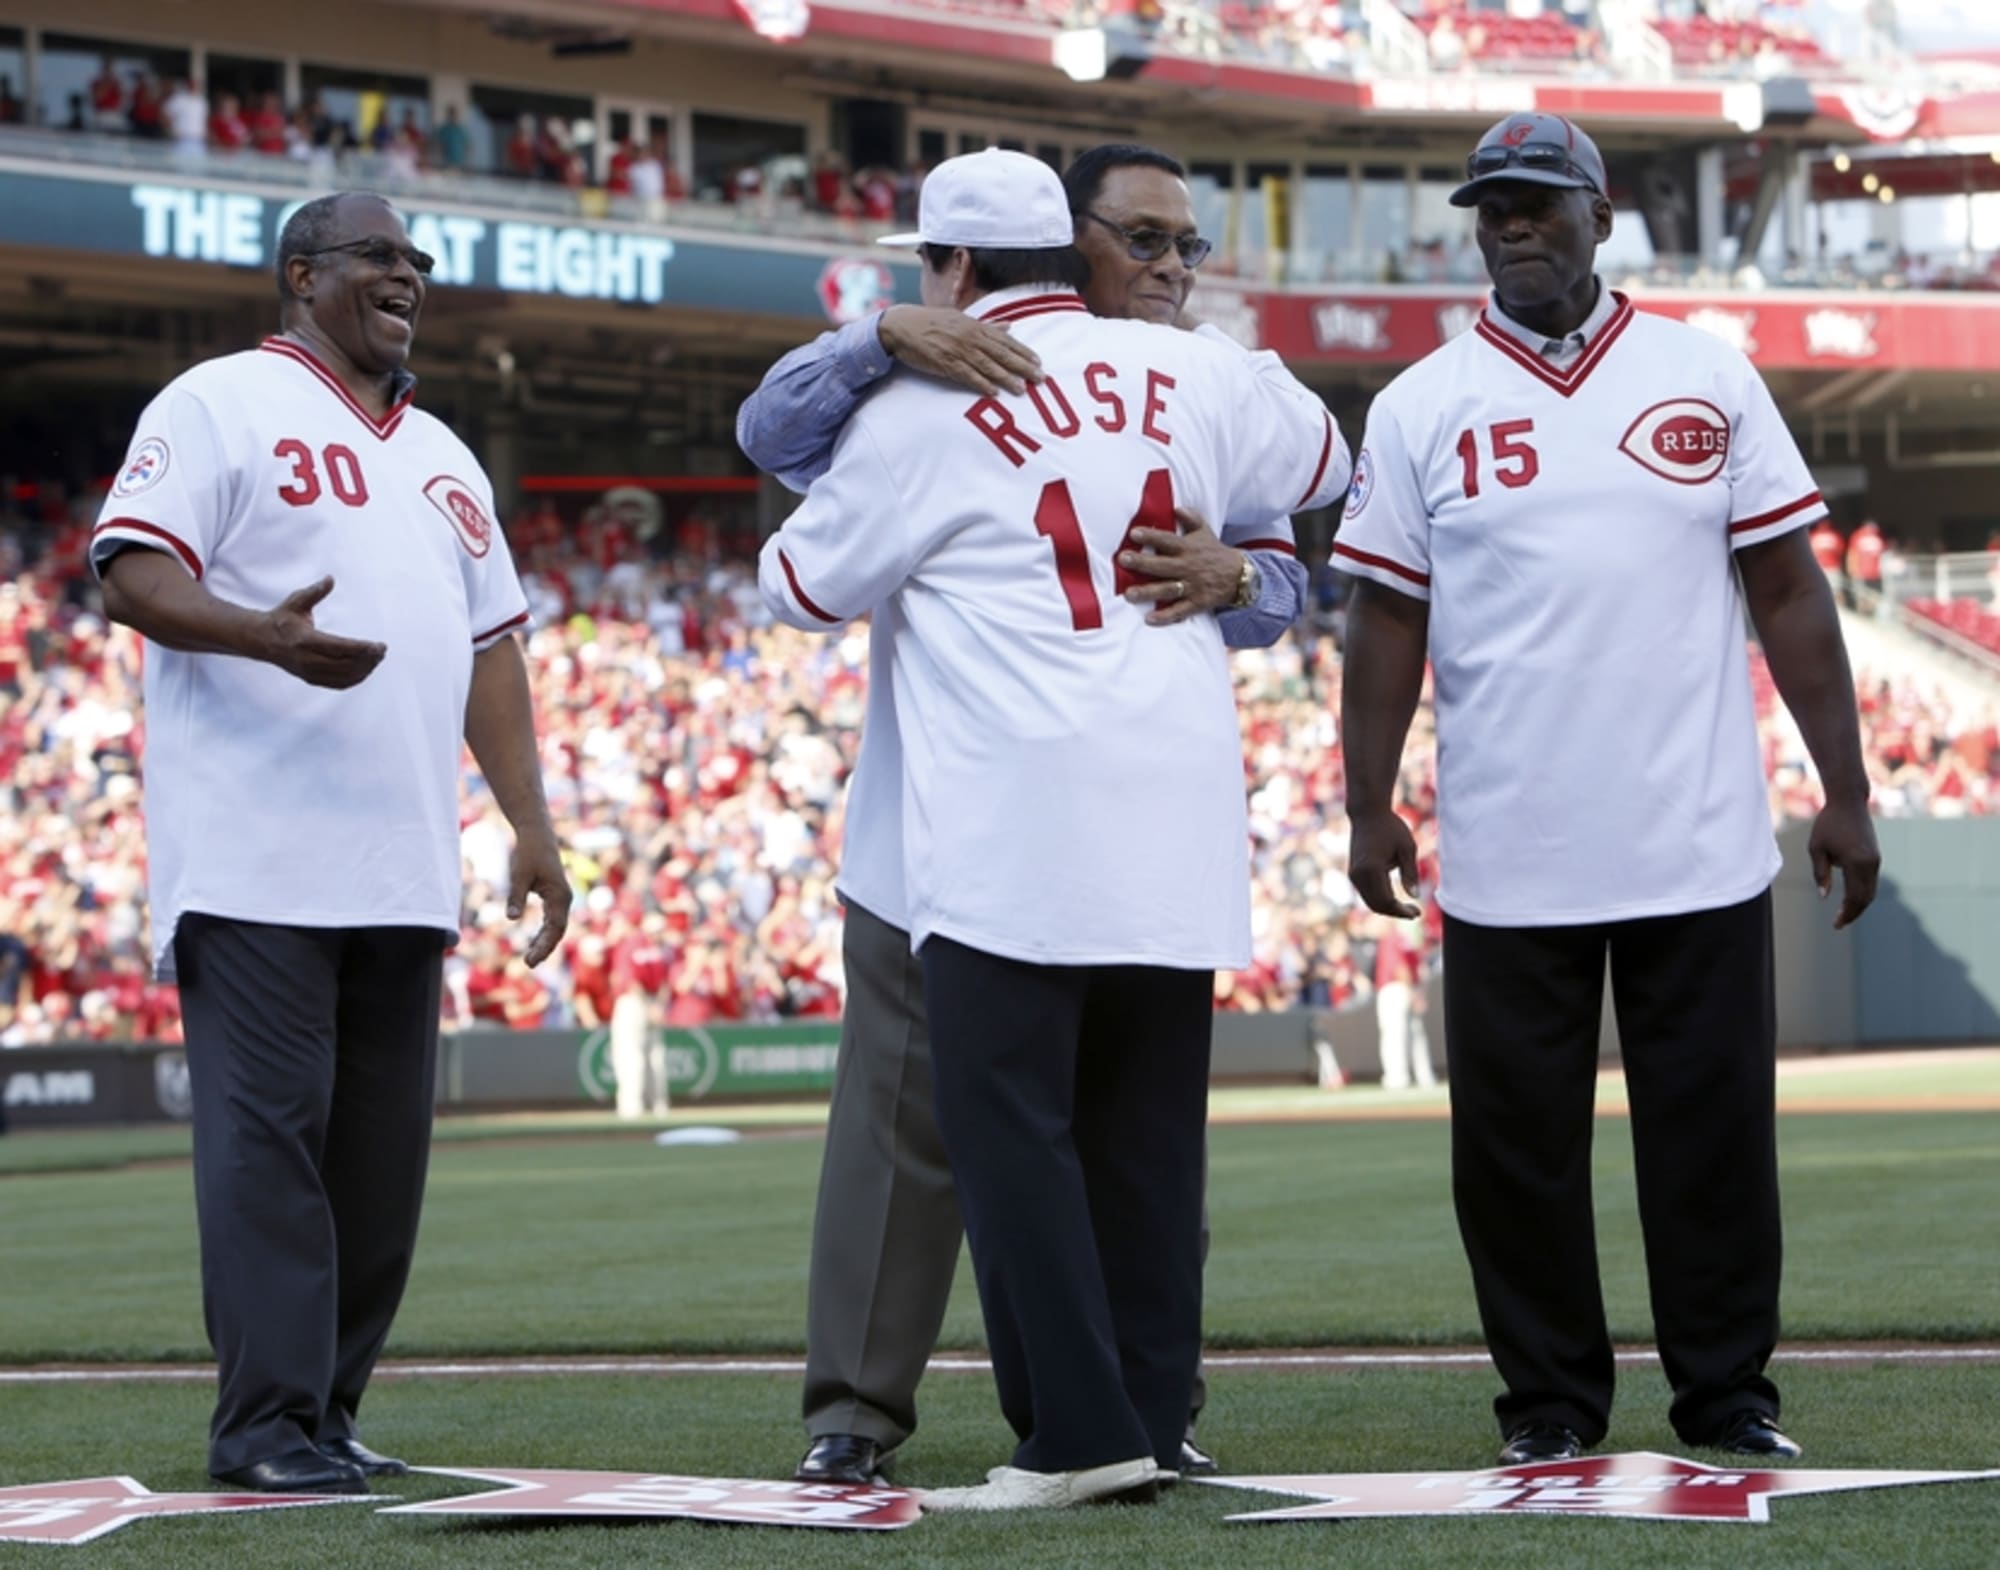 Pete Rose to Reds' Hall of Fame: 'Now is the time